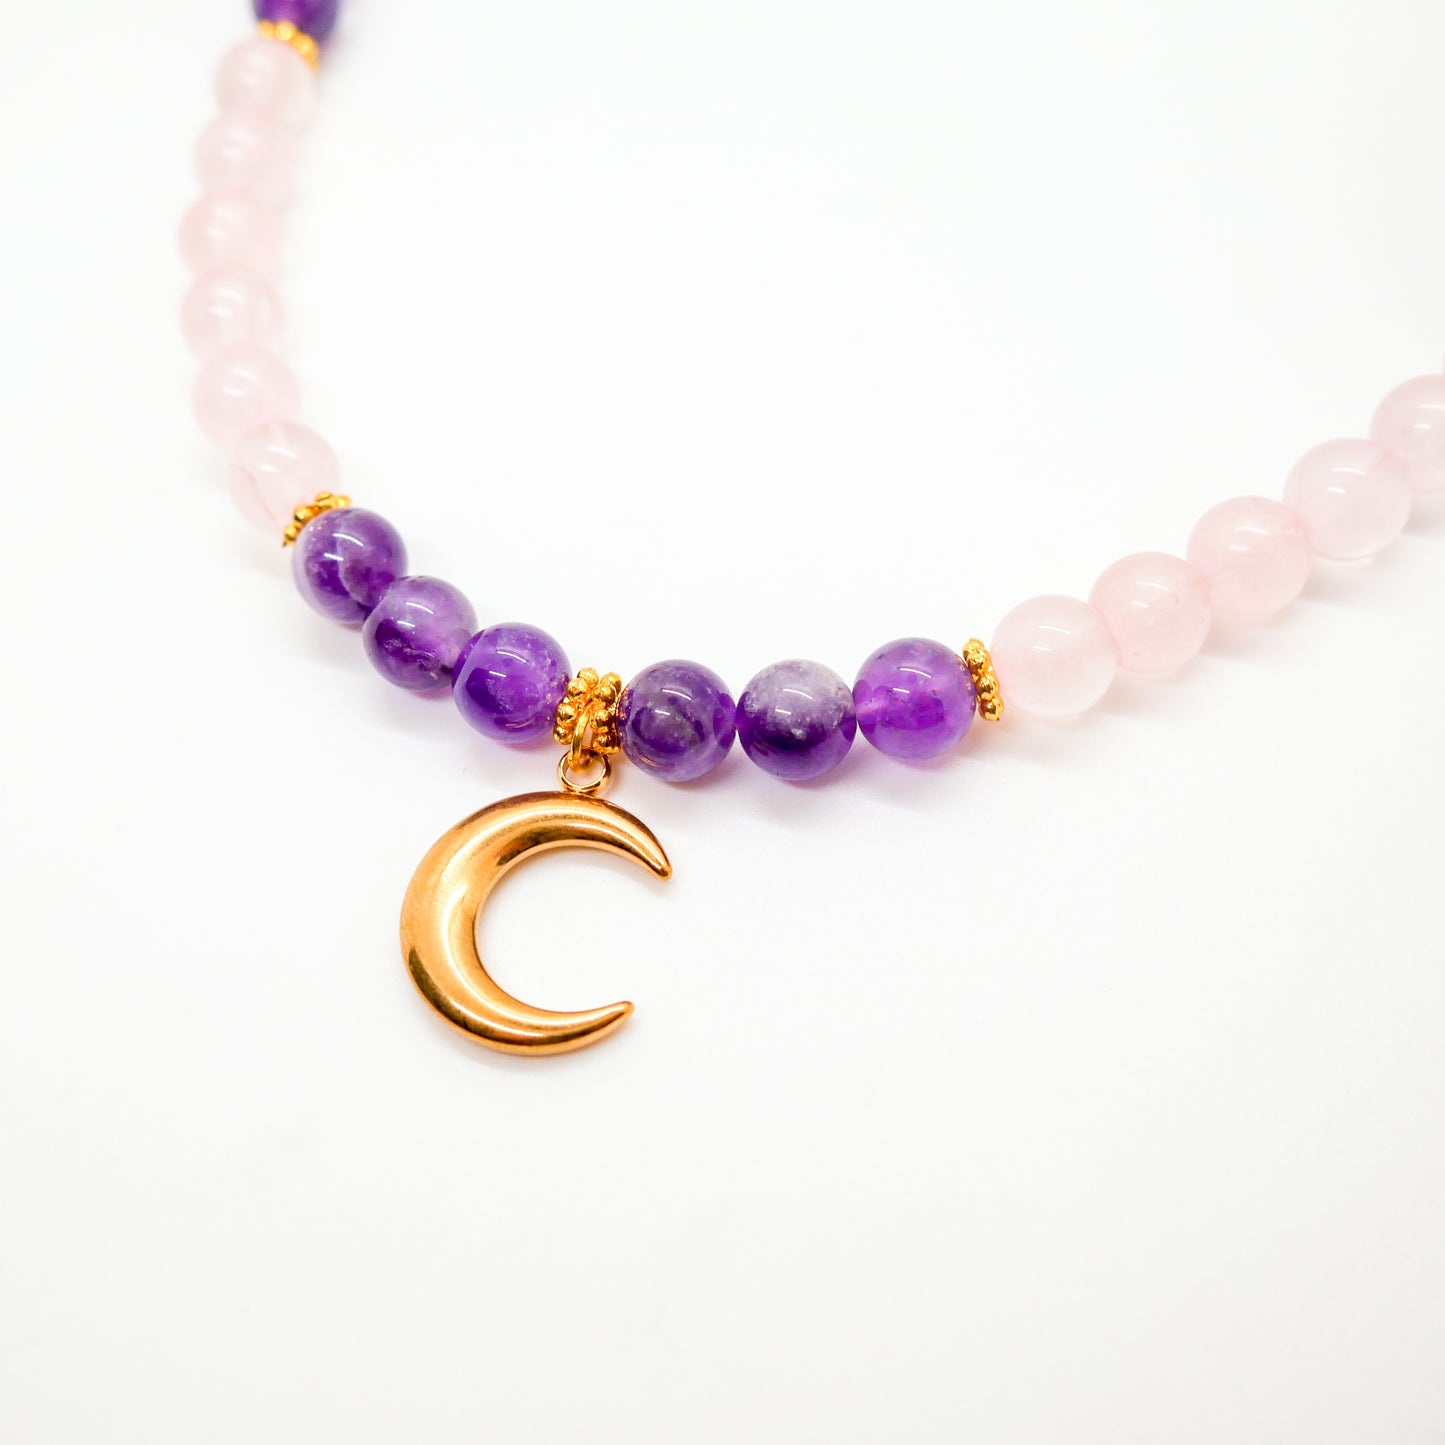 Cotton Candy Sky Moon Necklace